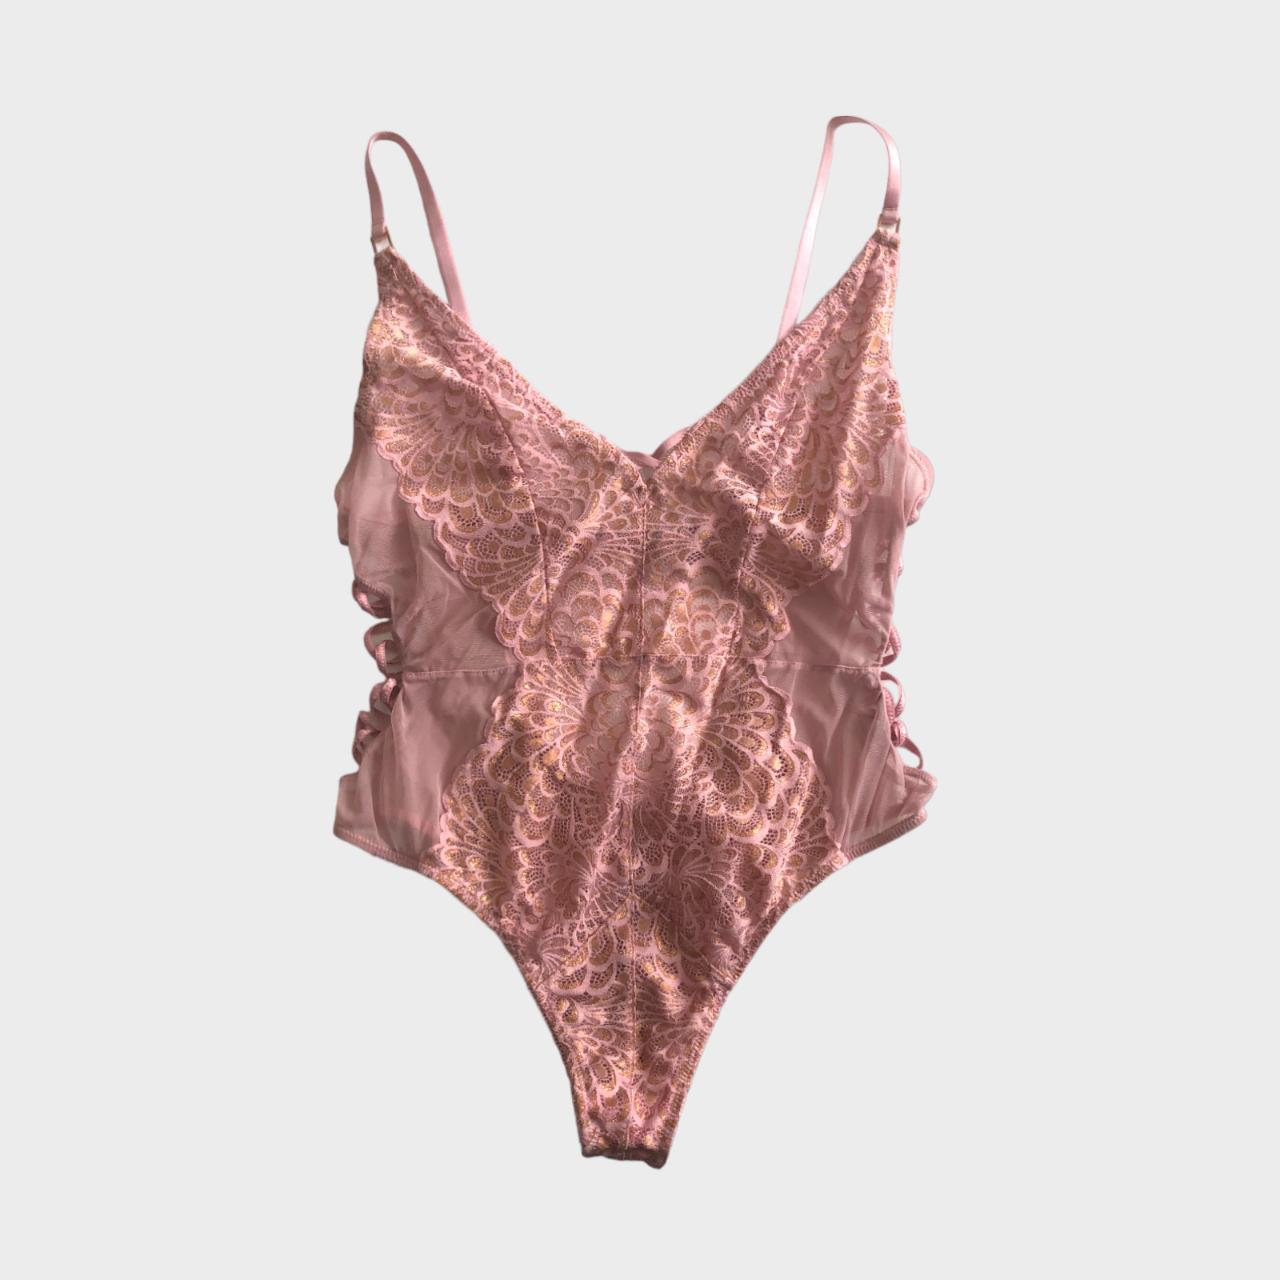 Metallic Lace Teddy Bodysuit in Cameo Pink by Savage - Depop